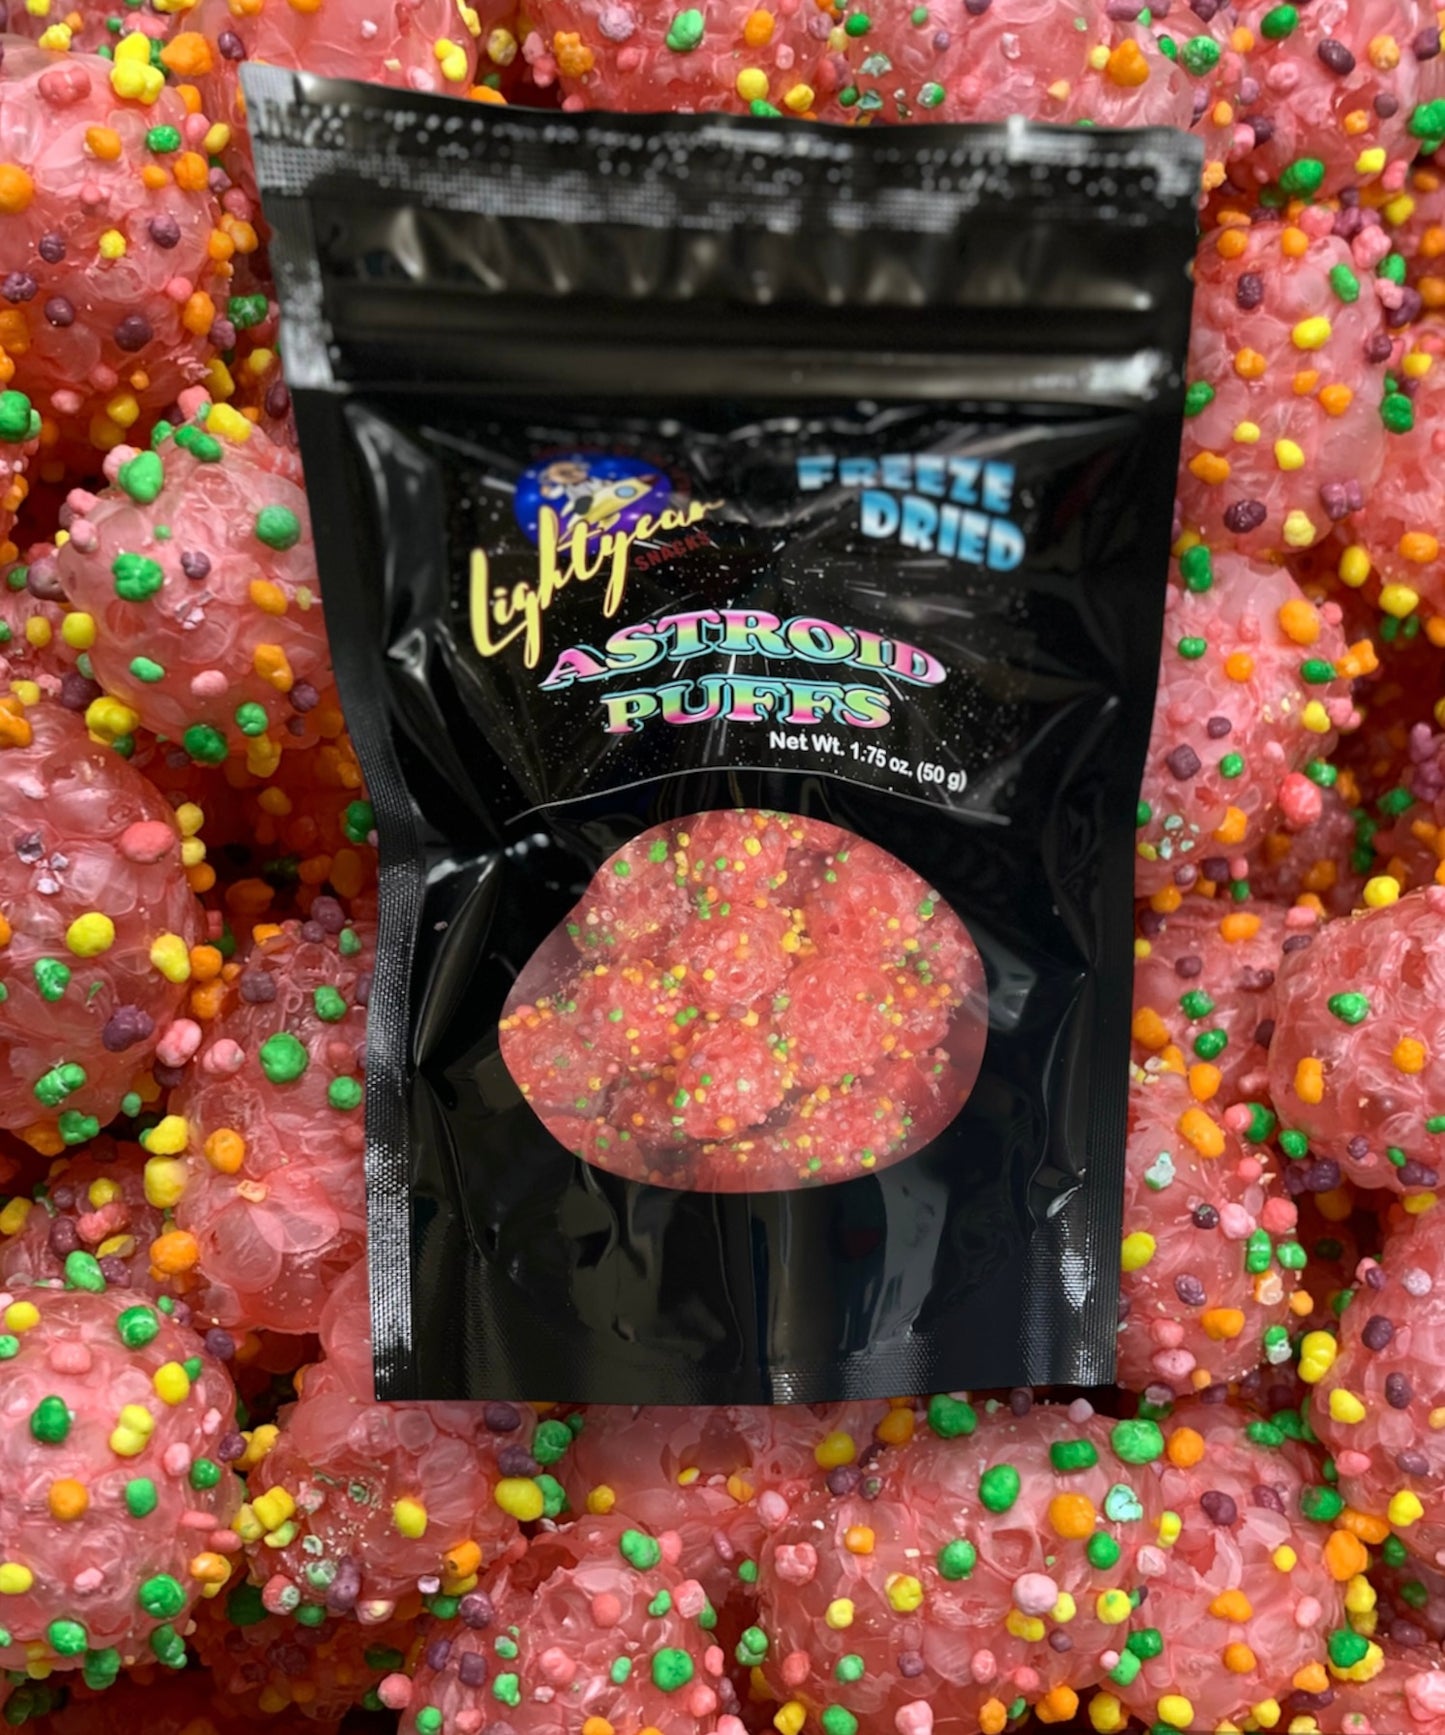 Astroid Puffs (Freeze Dried Gummy Clusters coated with candy)